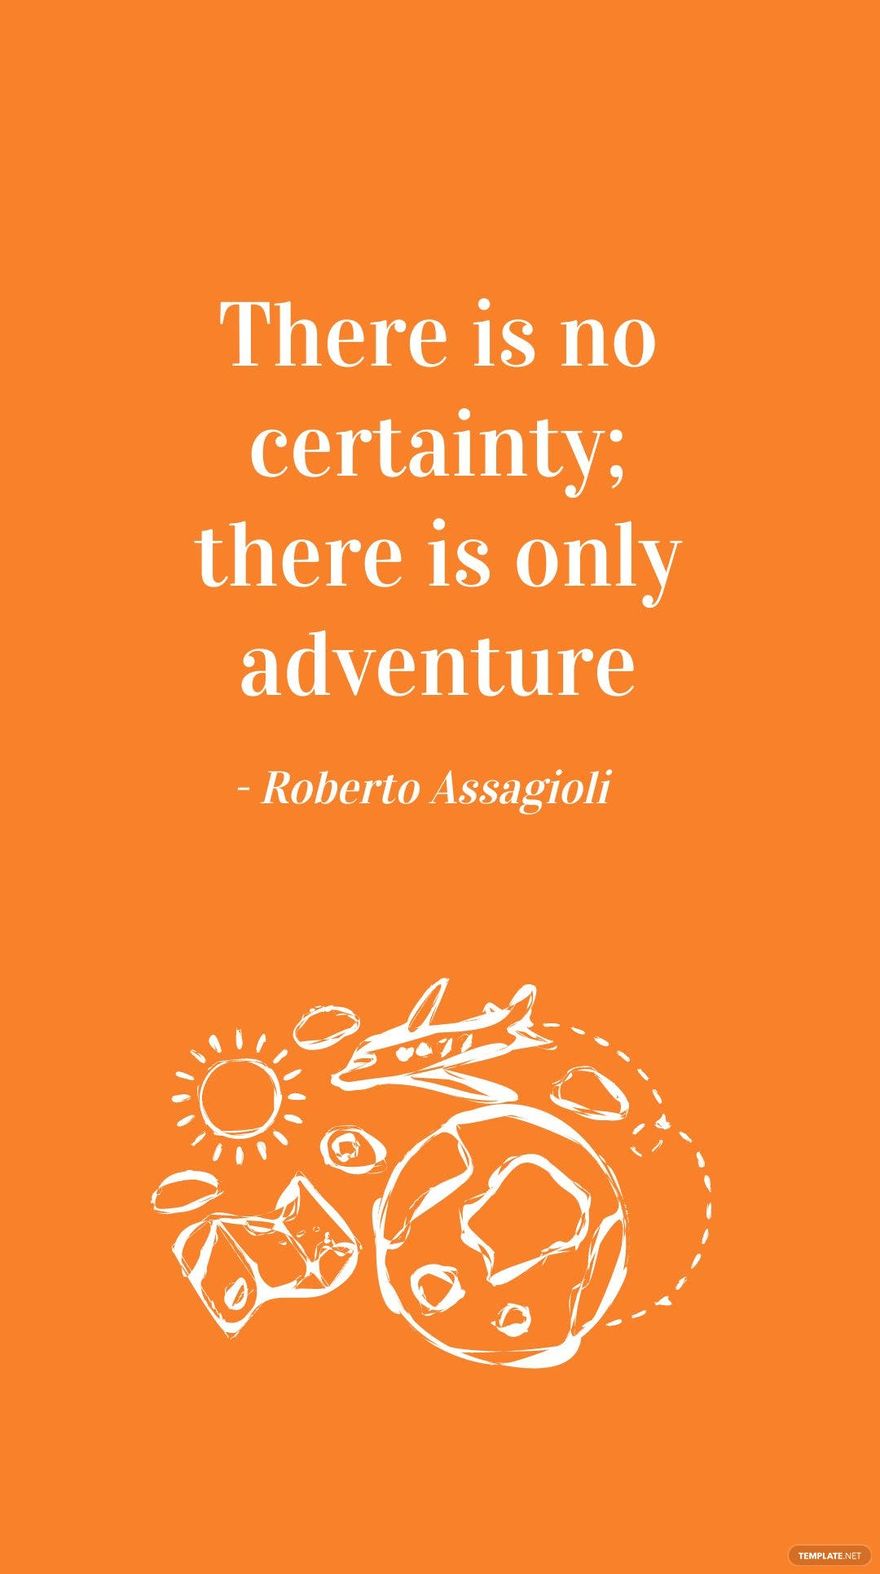 Roberto Assagioli - There is no certainty; there is only adventure